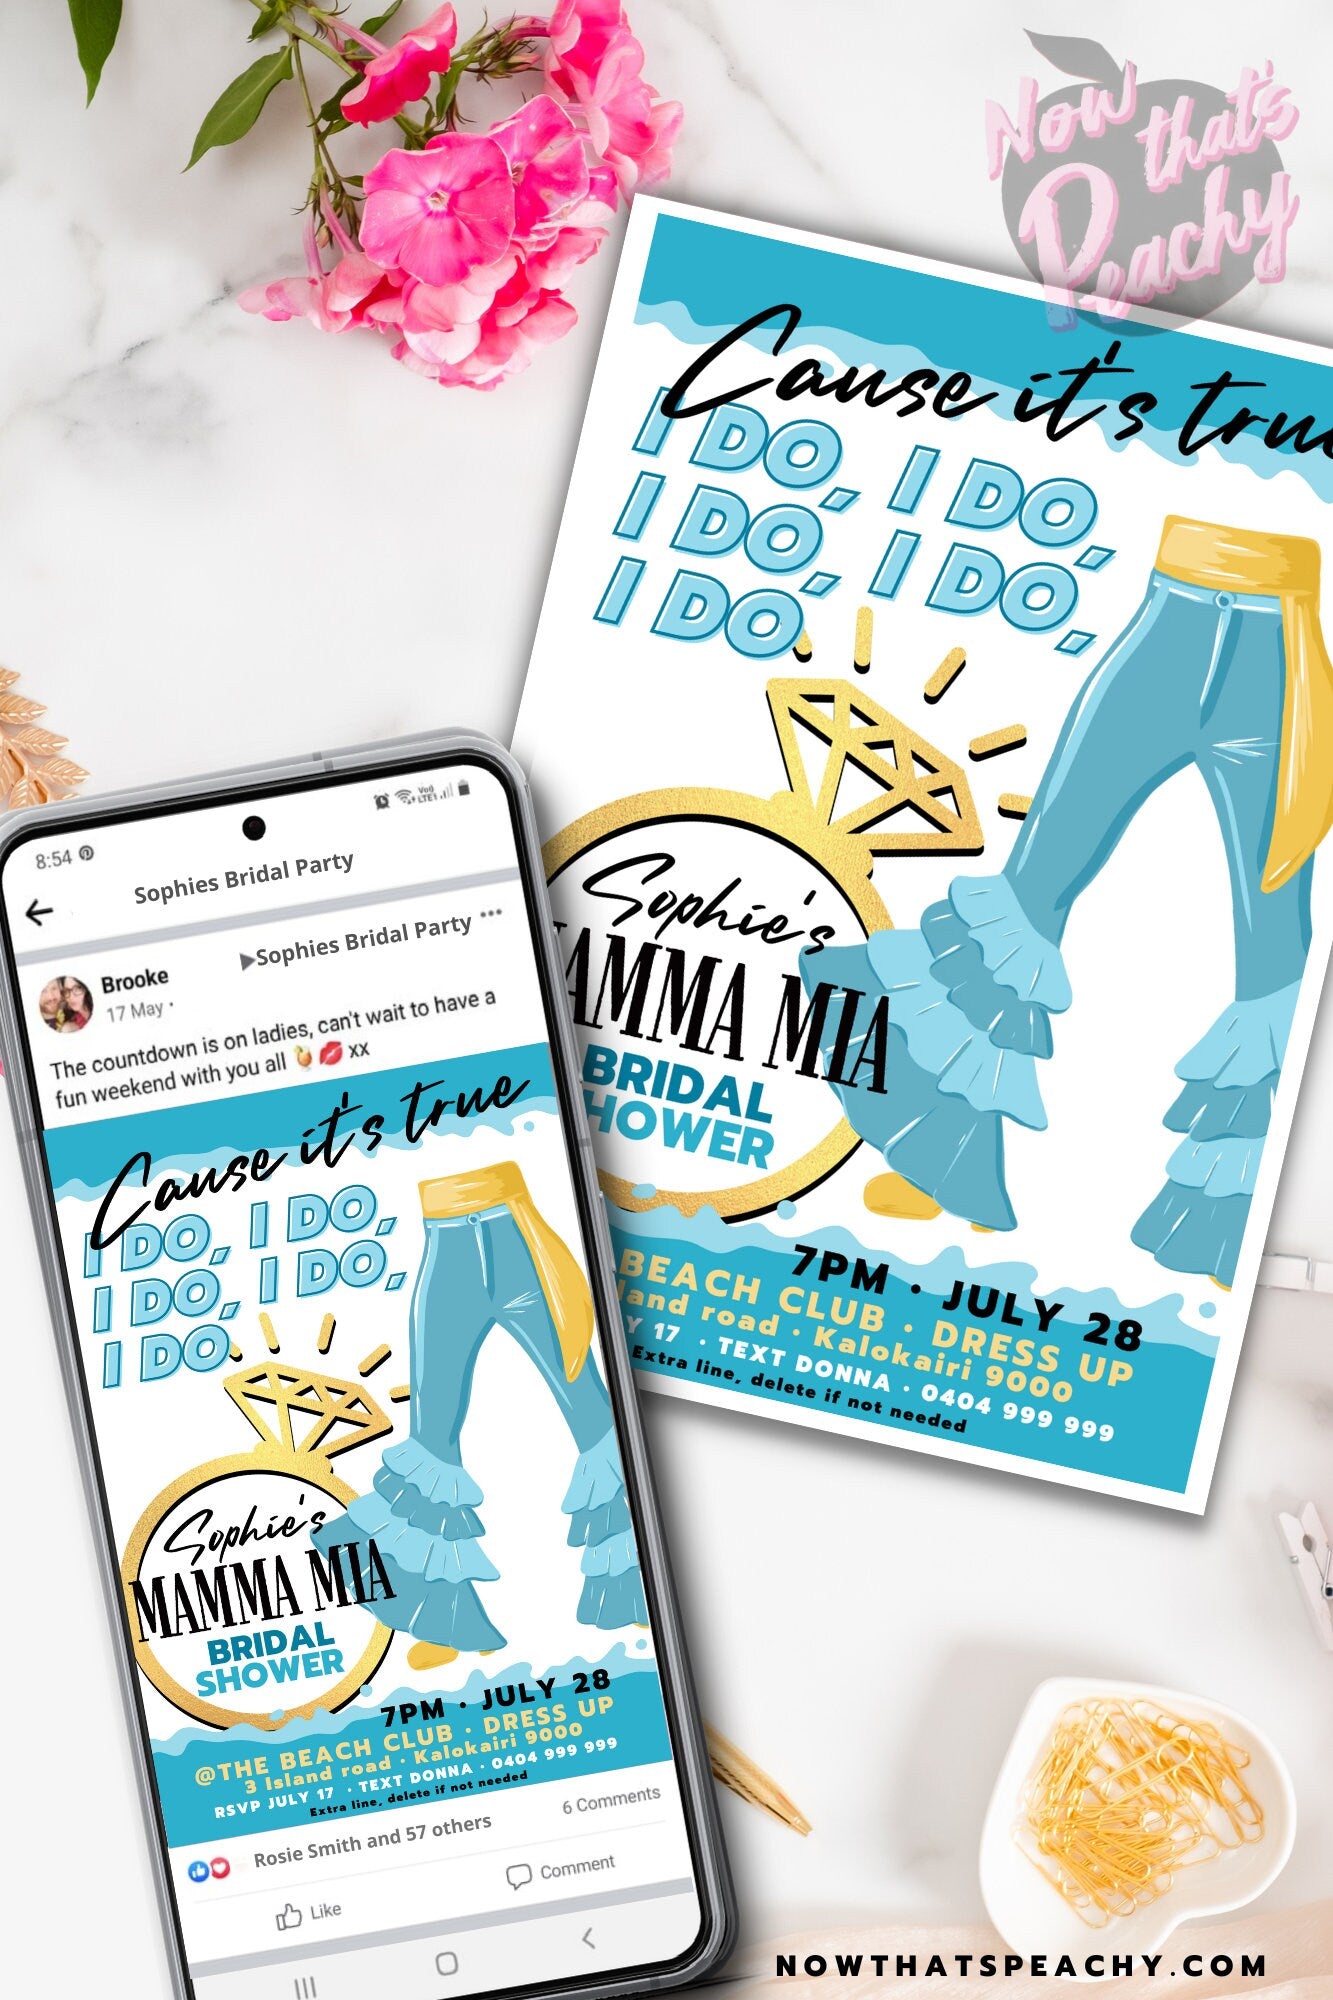 Used Clothing Fair Announcement with Stylish Woman Online Invitation  Template - VistaCreate